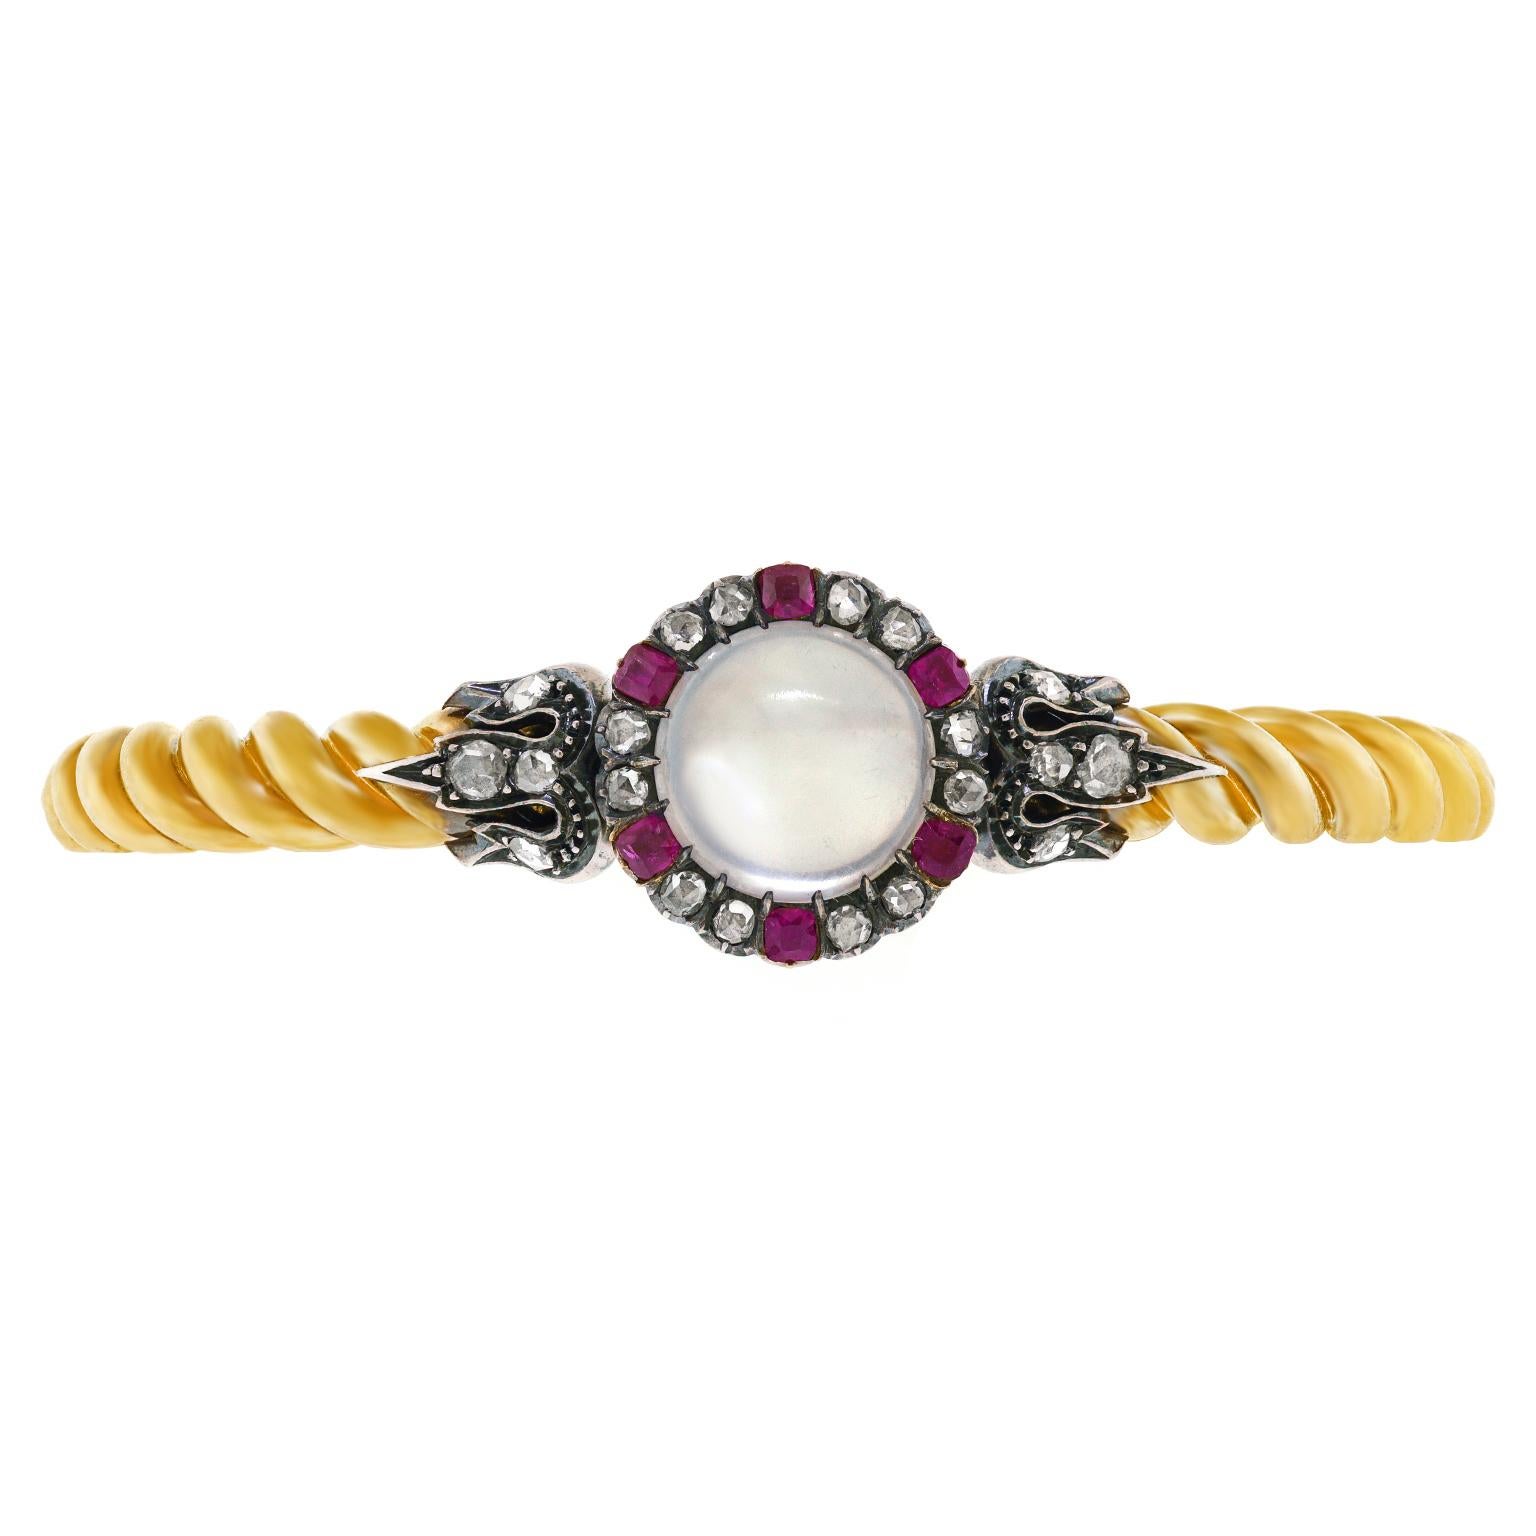 Moonstone, Ruby and Diamond Bracelet 18k c1870s France In Excellent Condition For Sale In Litchfield, CT